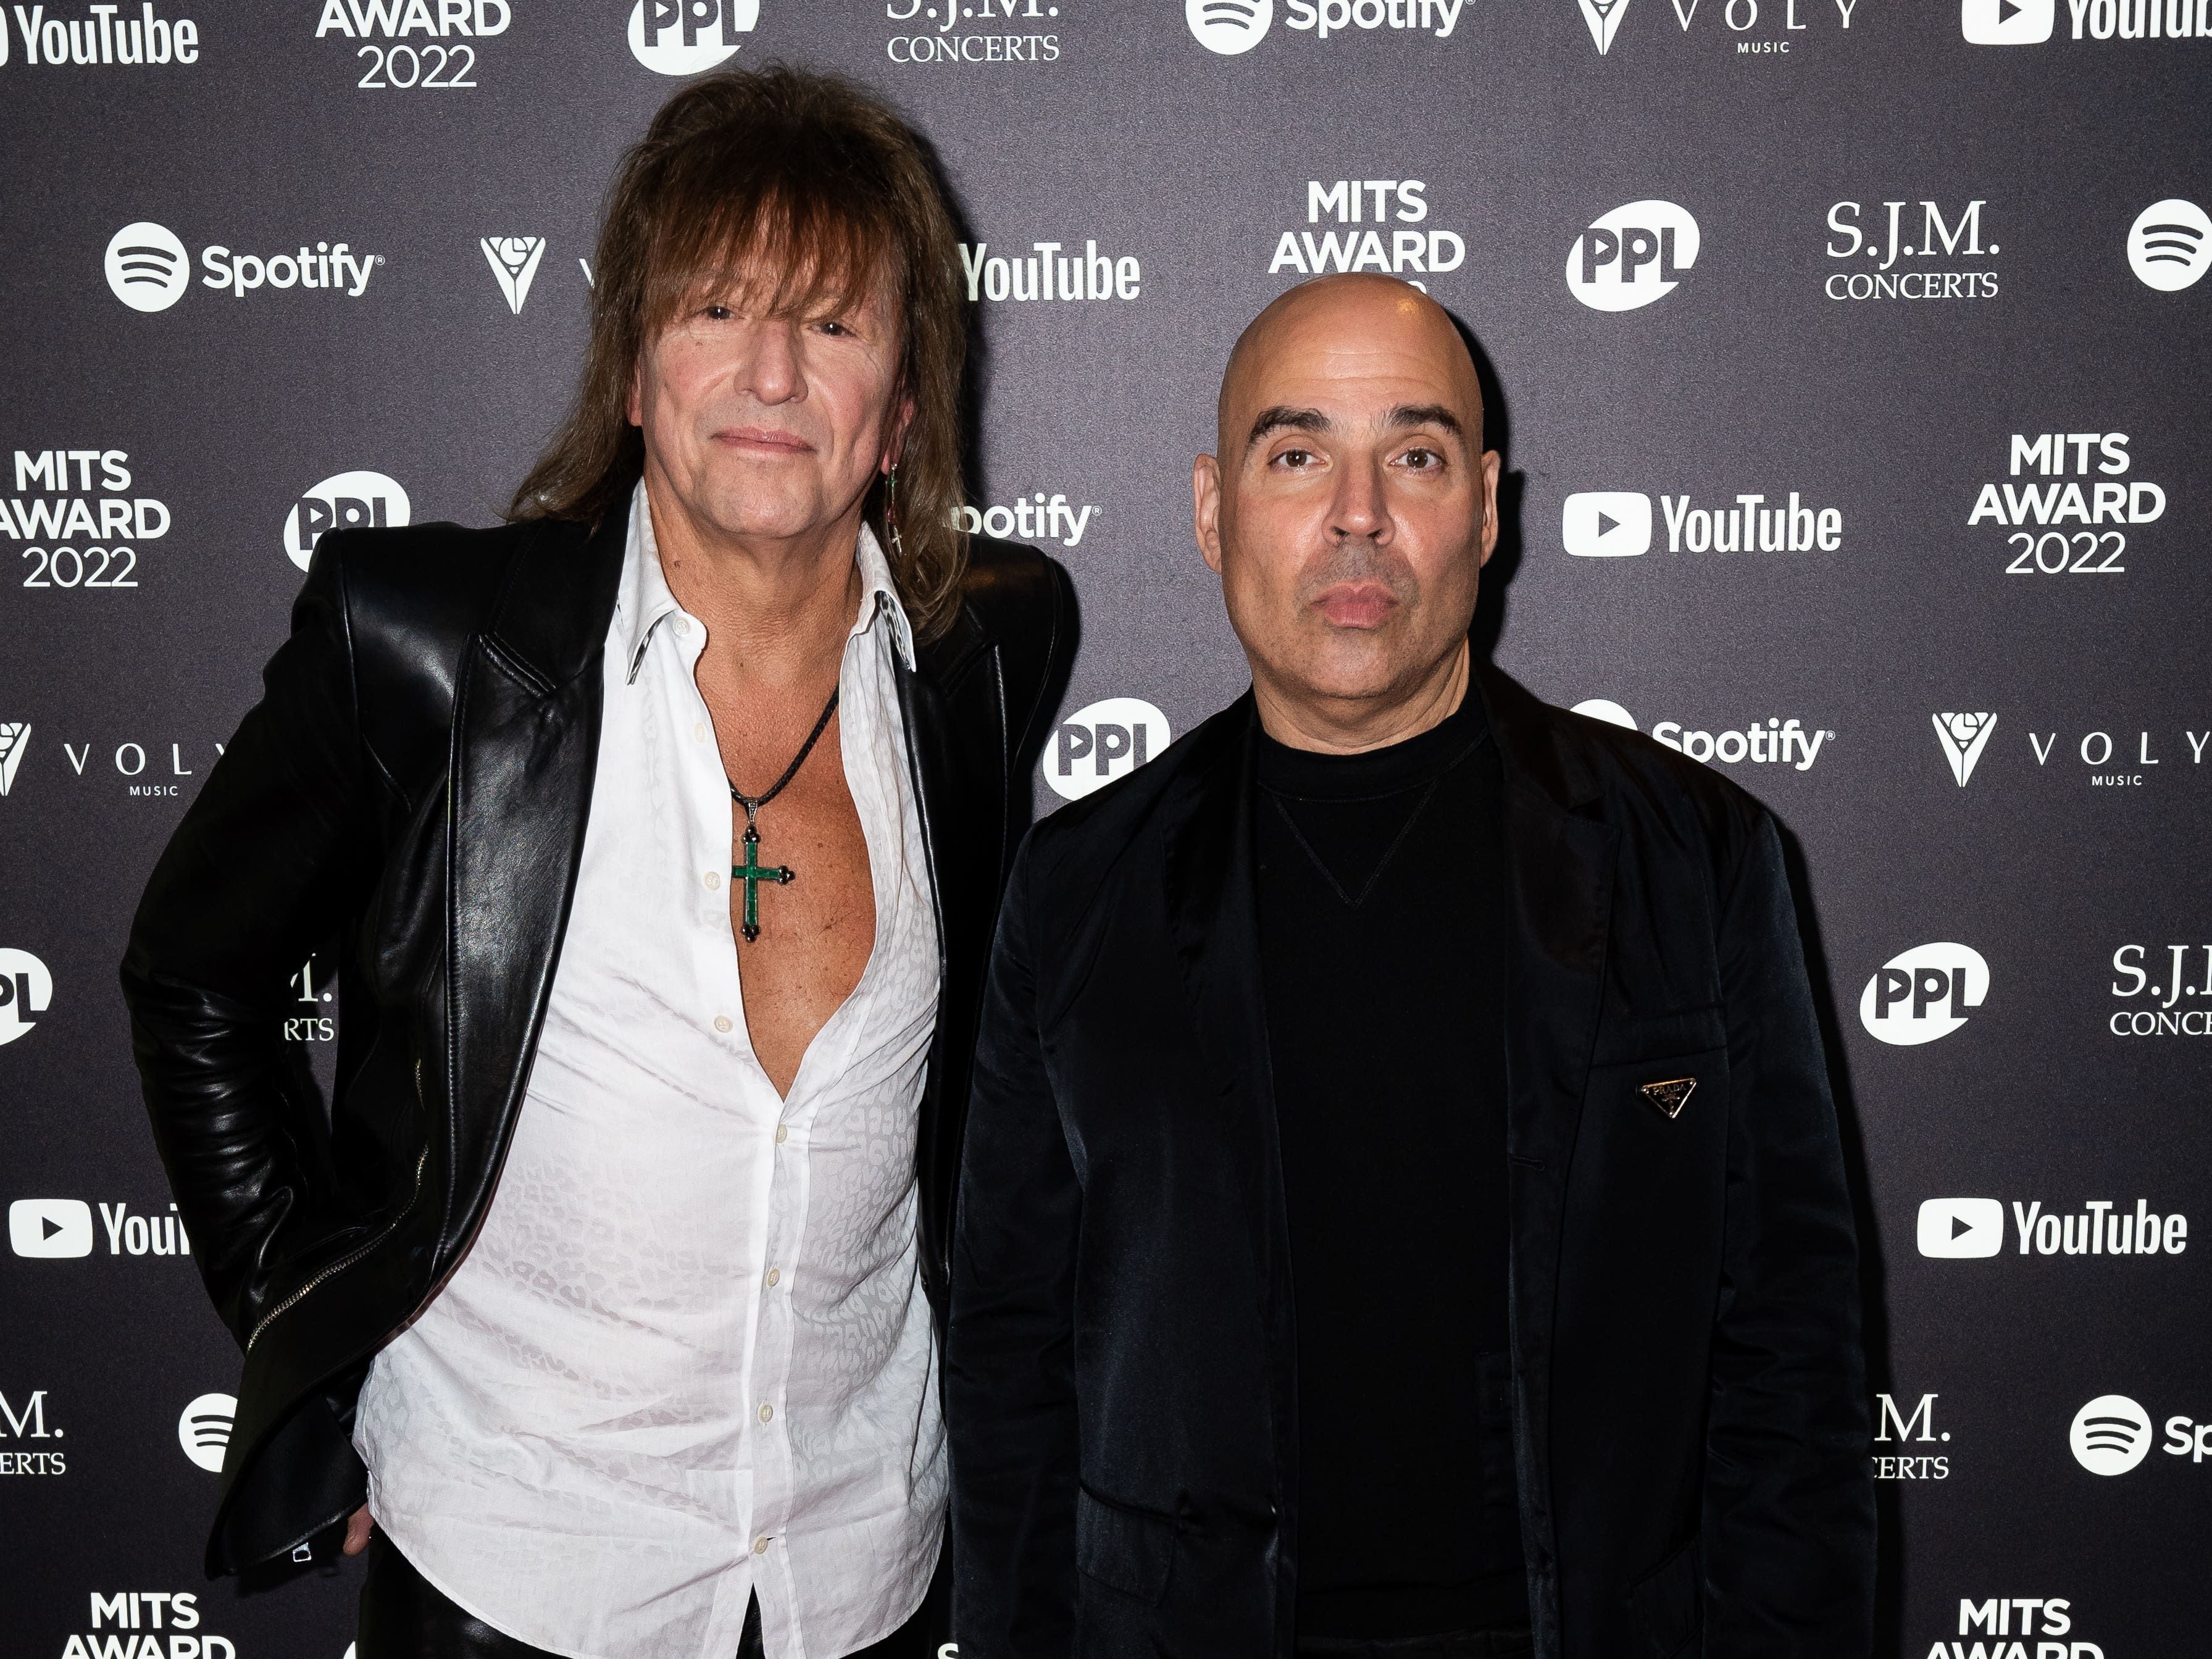 Hipgnosis founder quits amid plans to ‘spend time’ backing songwriters over pay